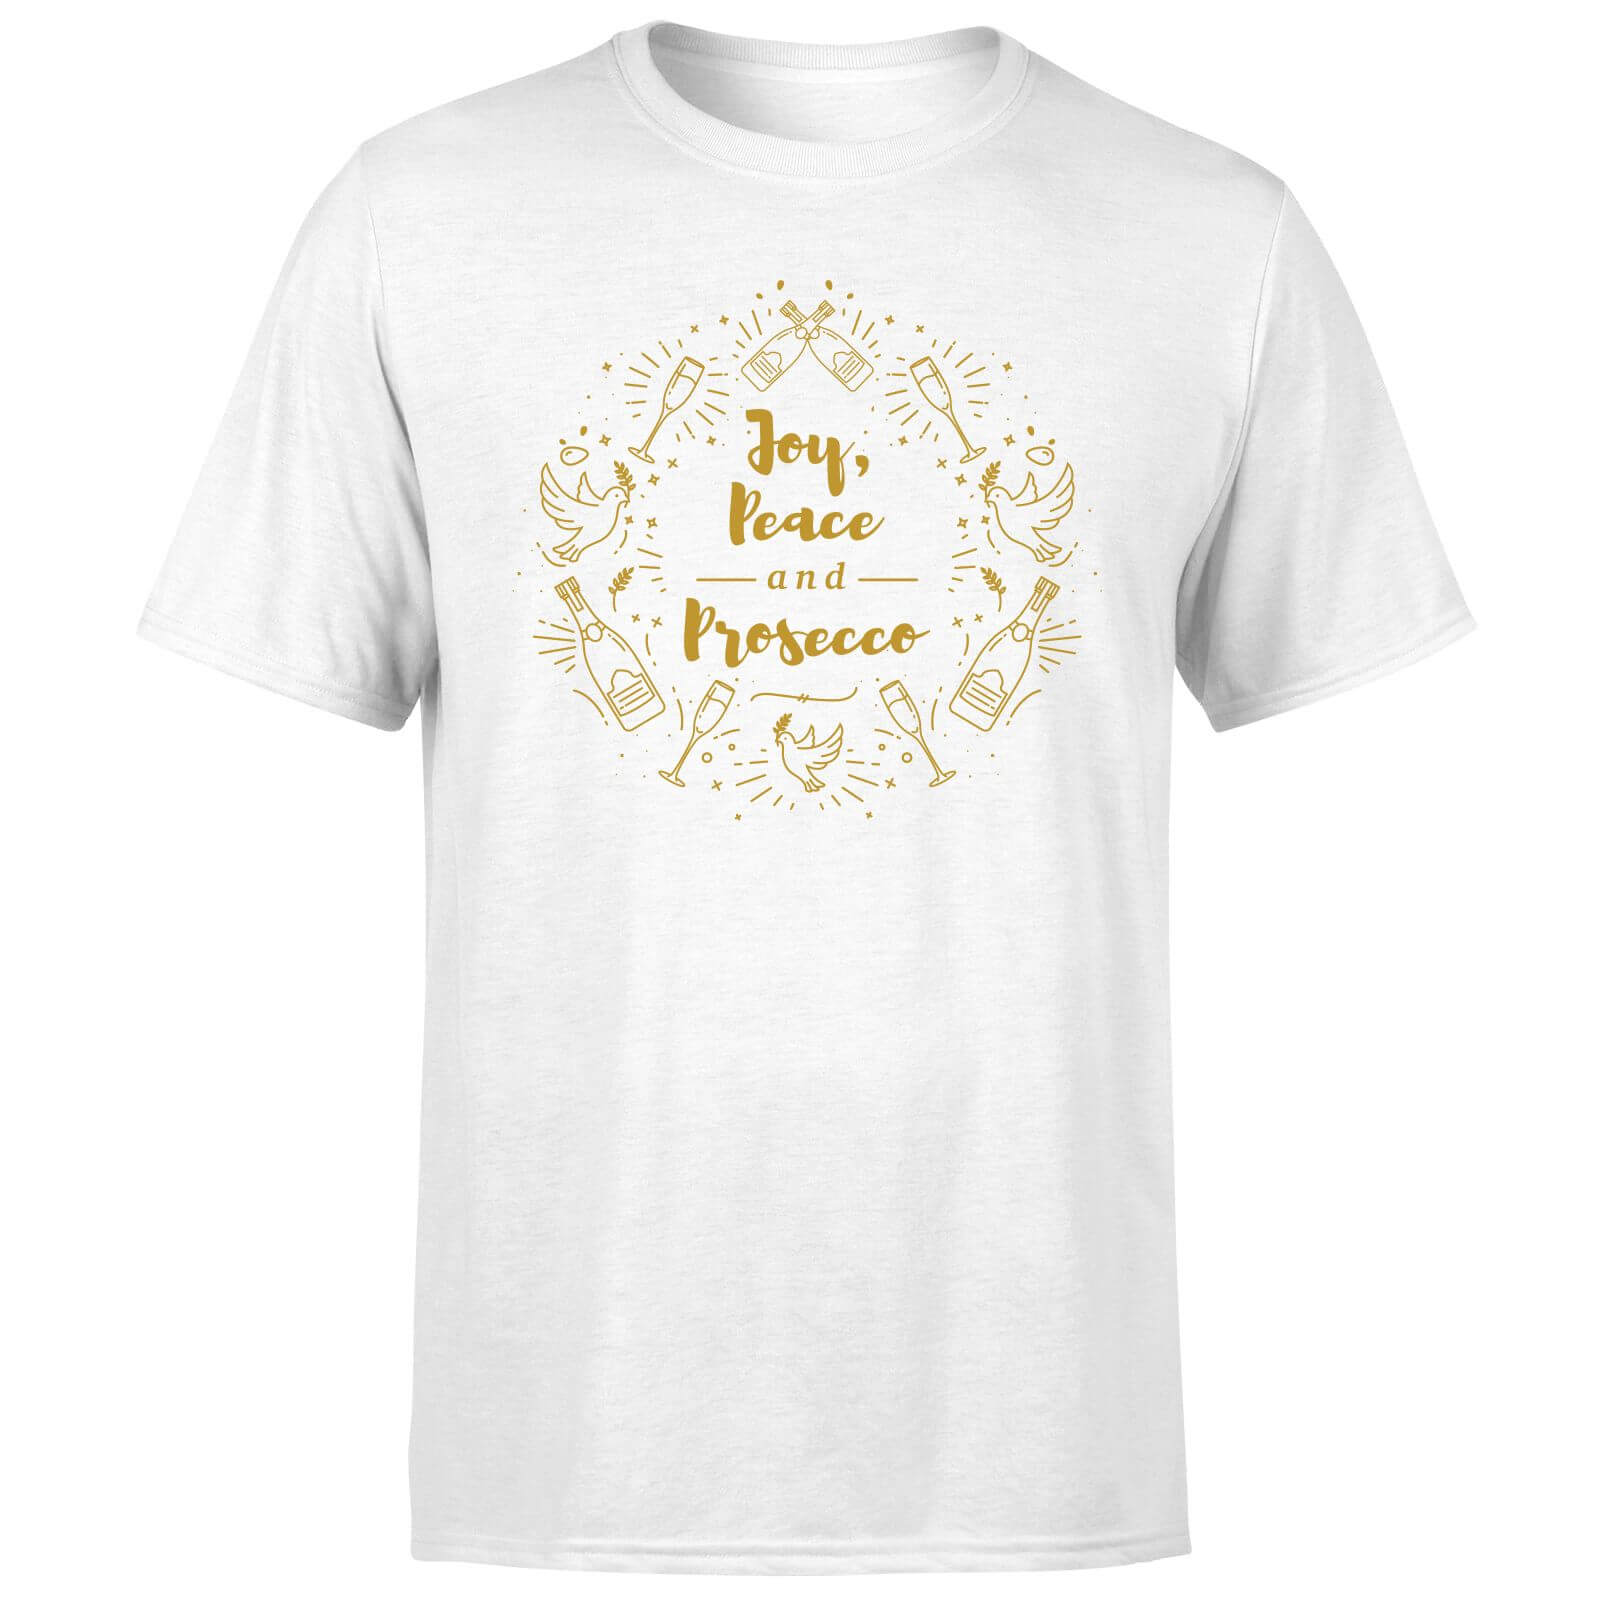 Joy, Peace And Prosecco T-Shirt - White - S - White